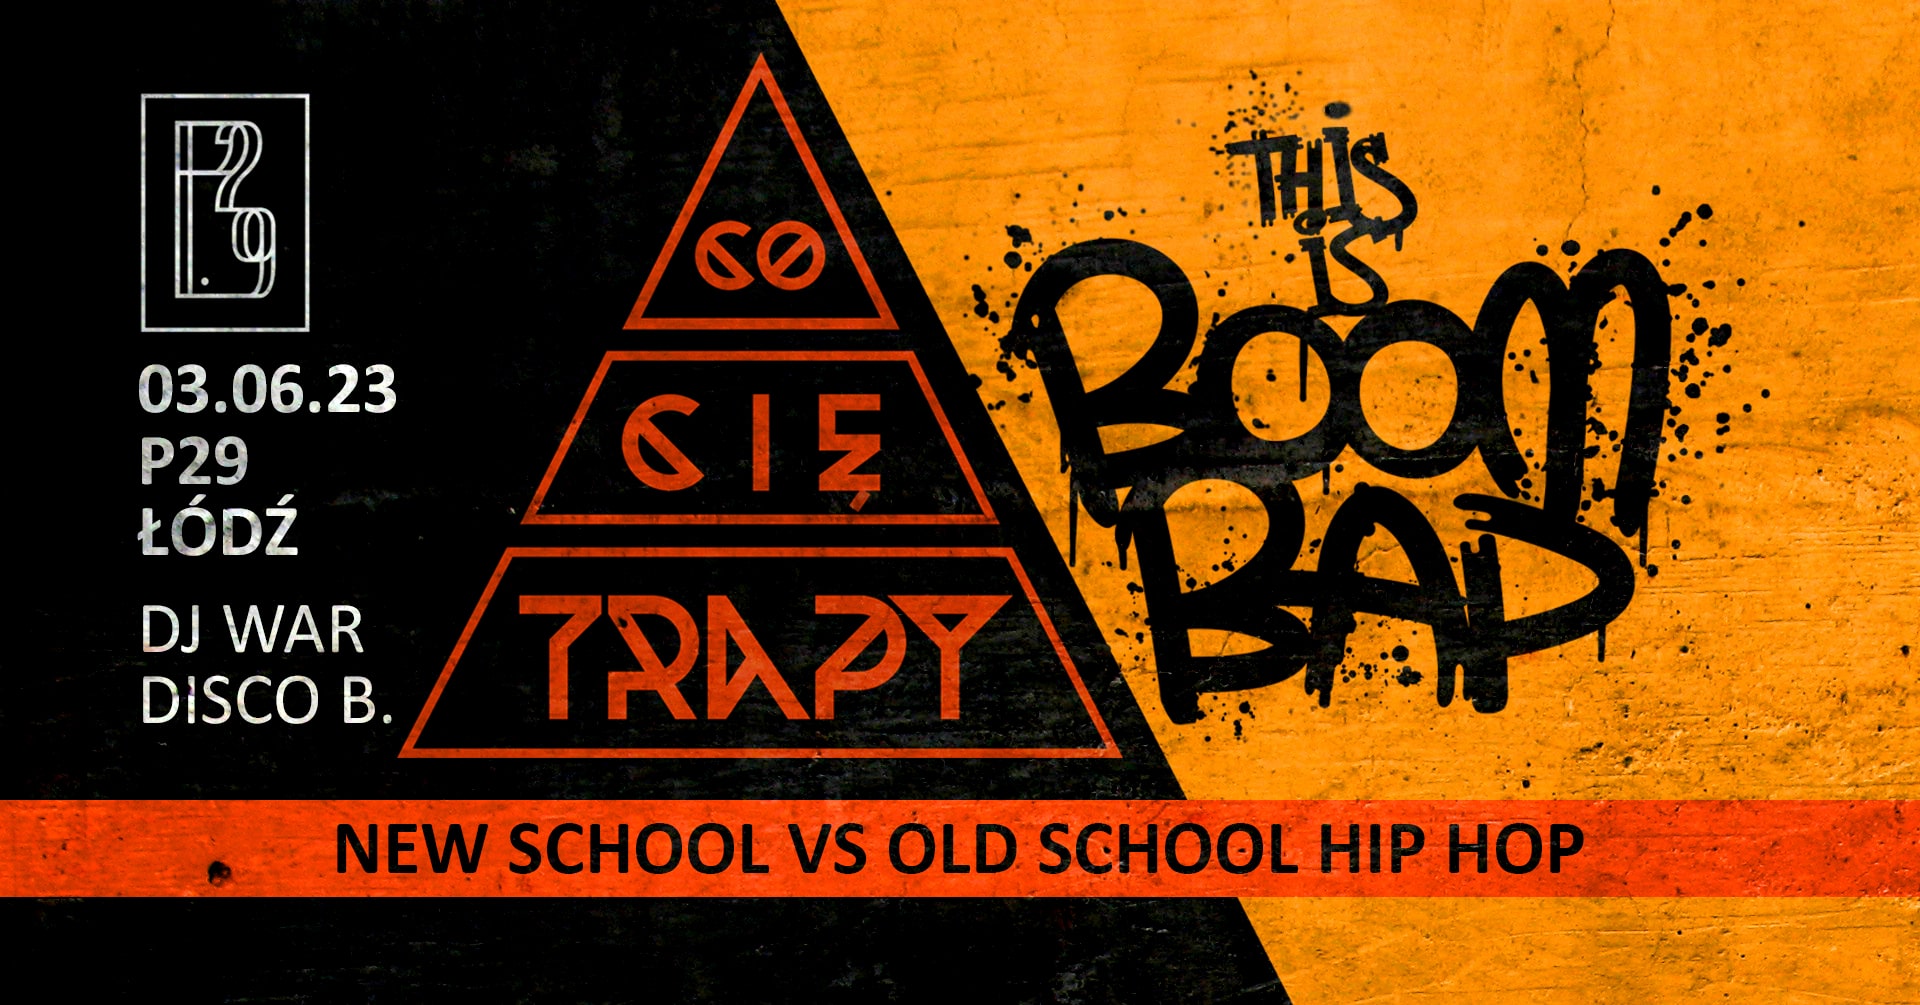 Co Cię Trapy X This is Boom Bap – New school vs old school Hip Hop